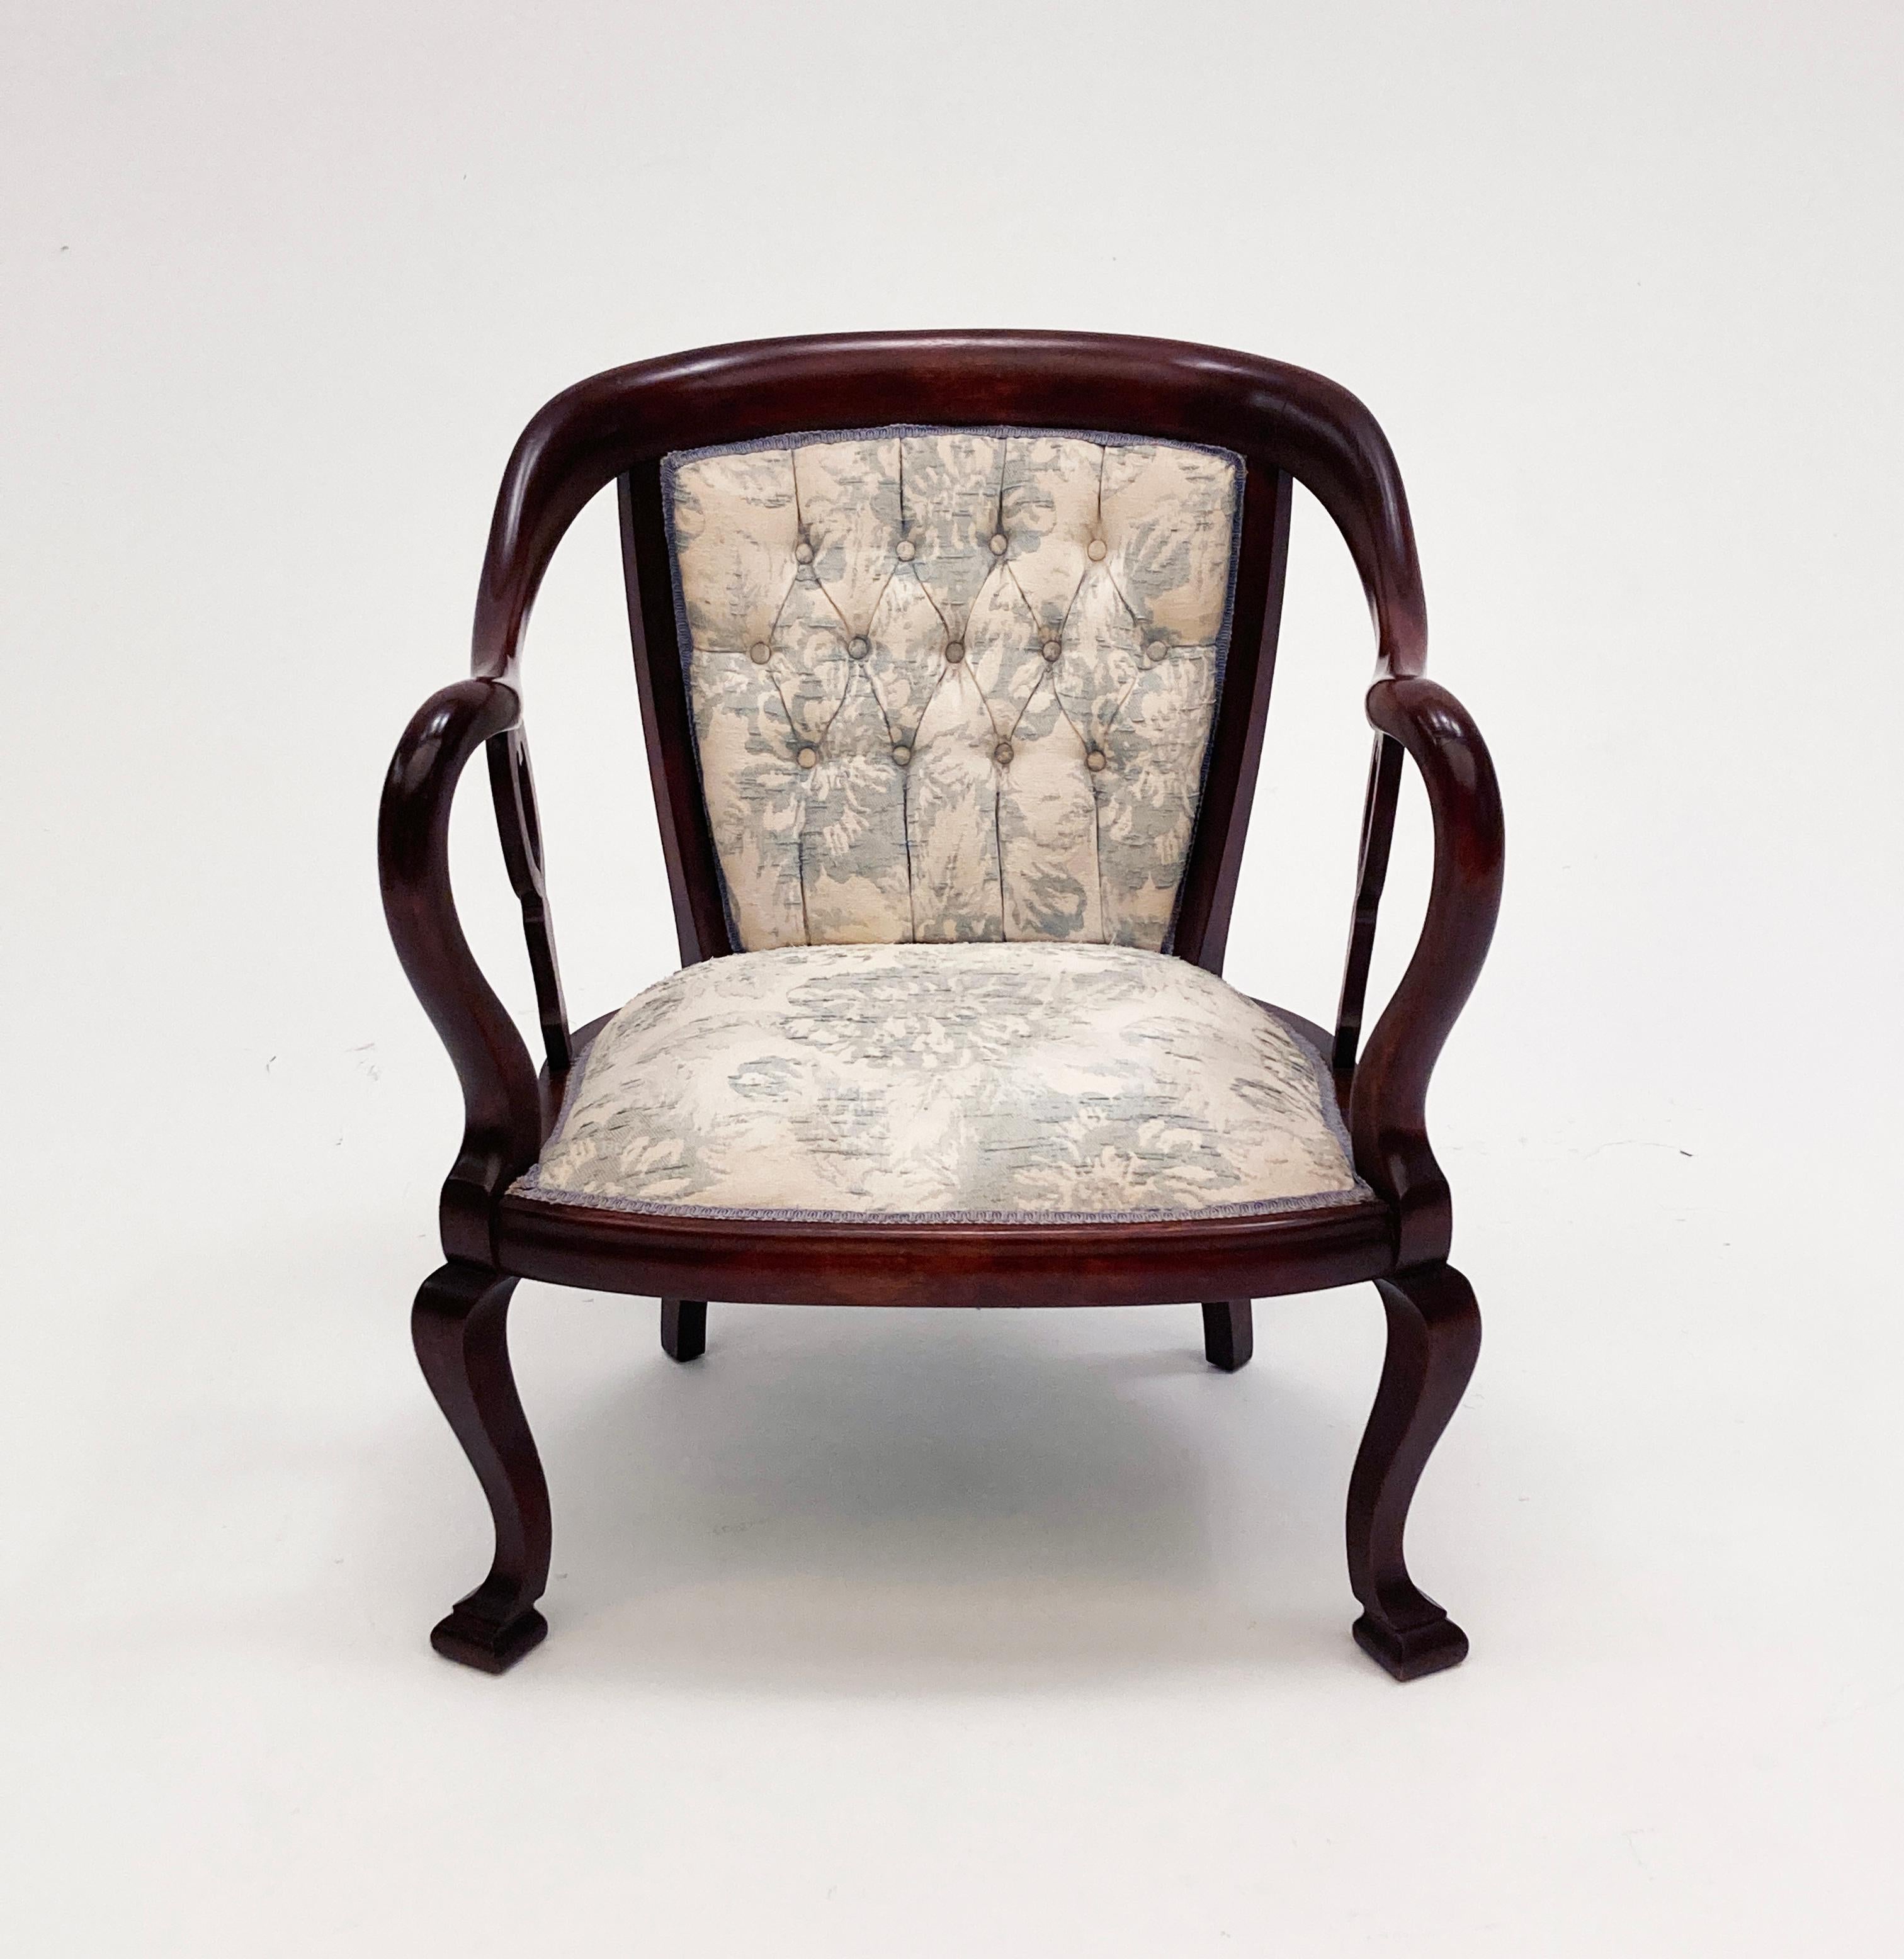 19th Century English Mahogany Settee, Chair and Rocker - Set of Three  For Sale 2